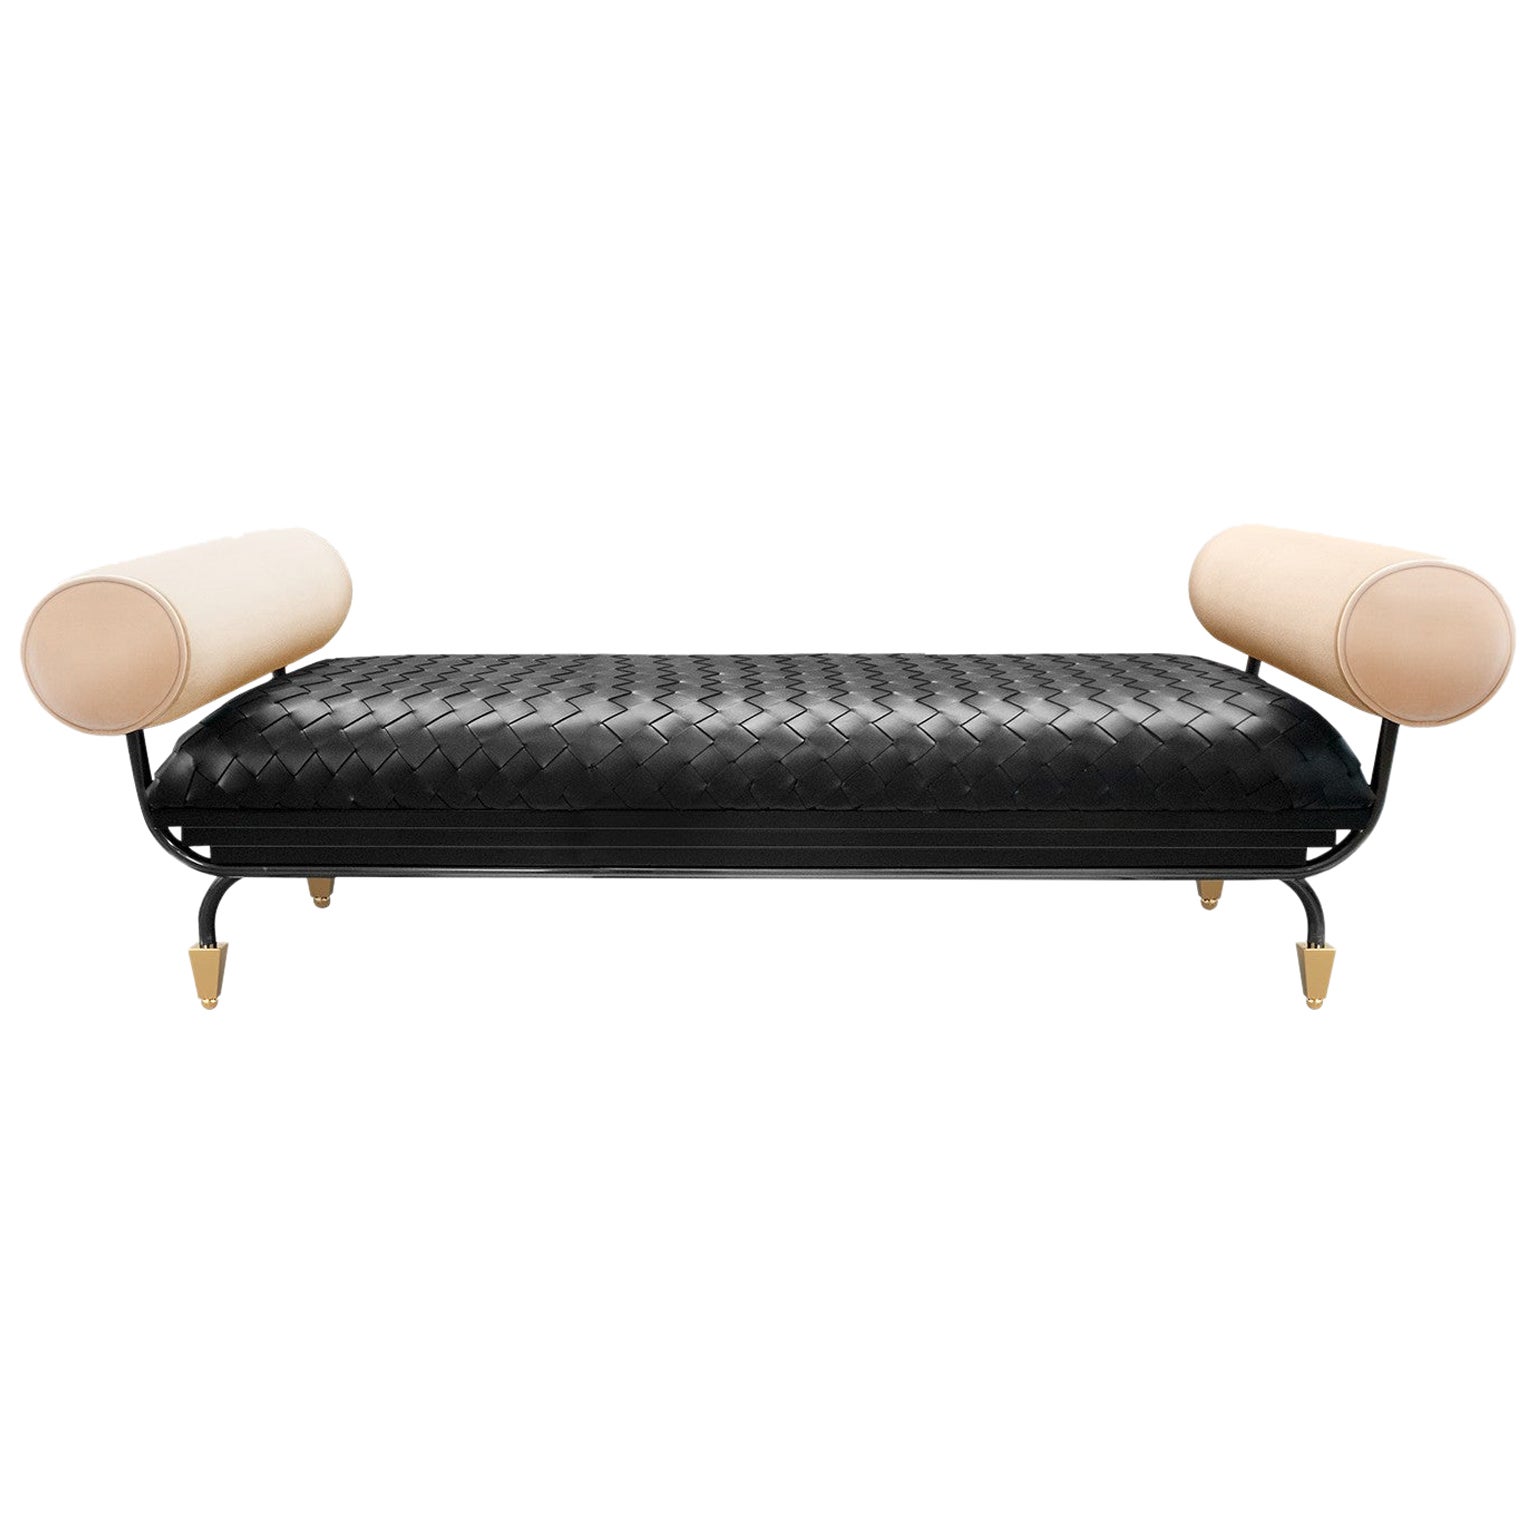 Modern Black Braided Leather Bench W/ Suede Arms & Polished Brass Legs